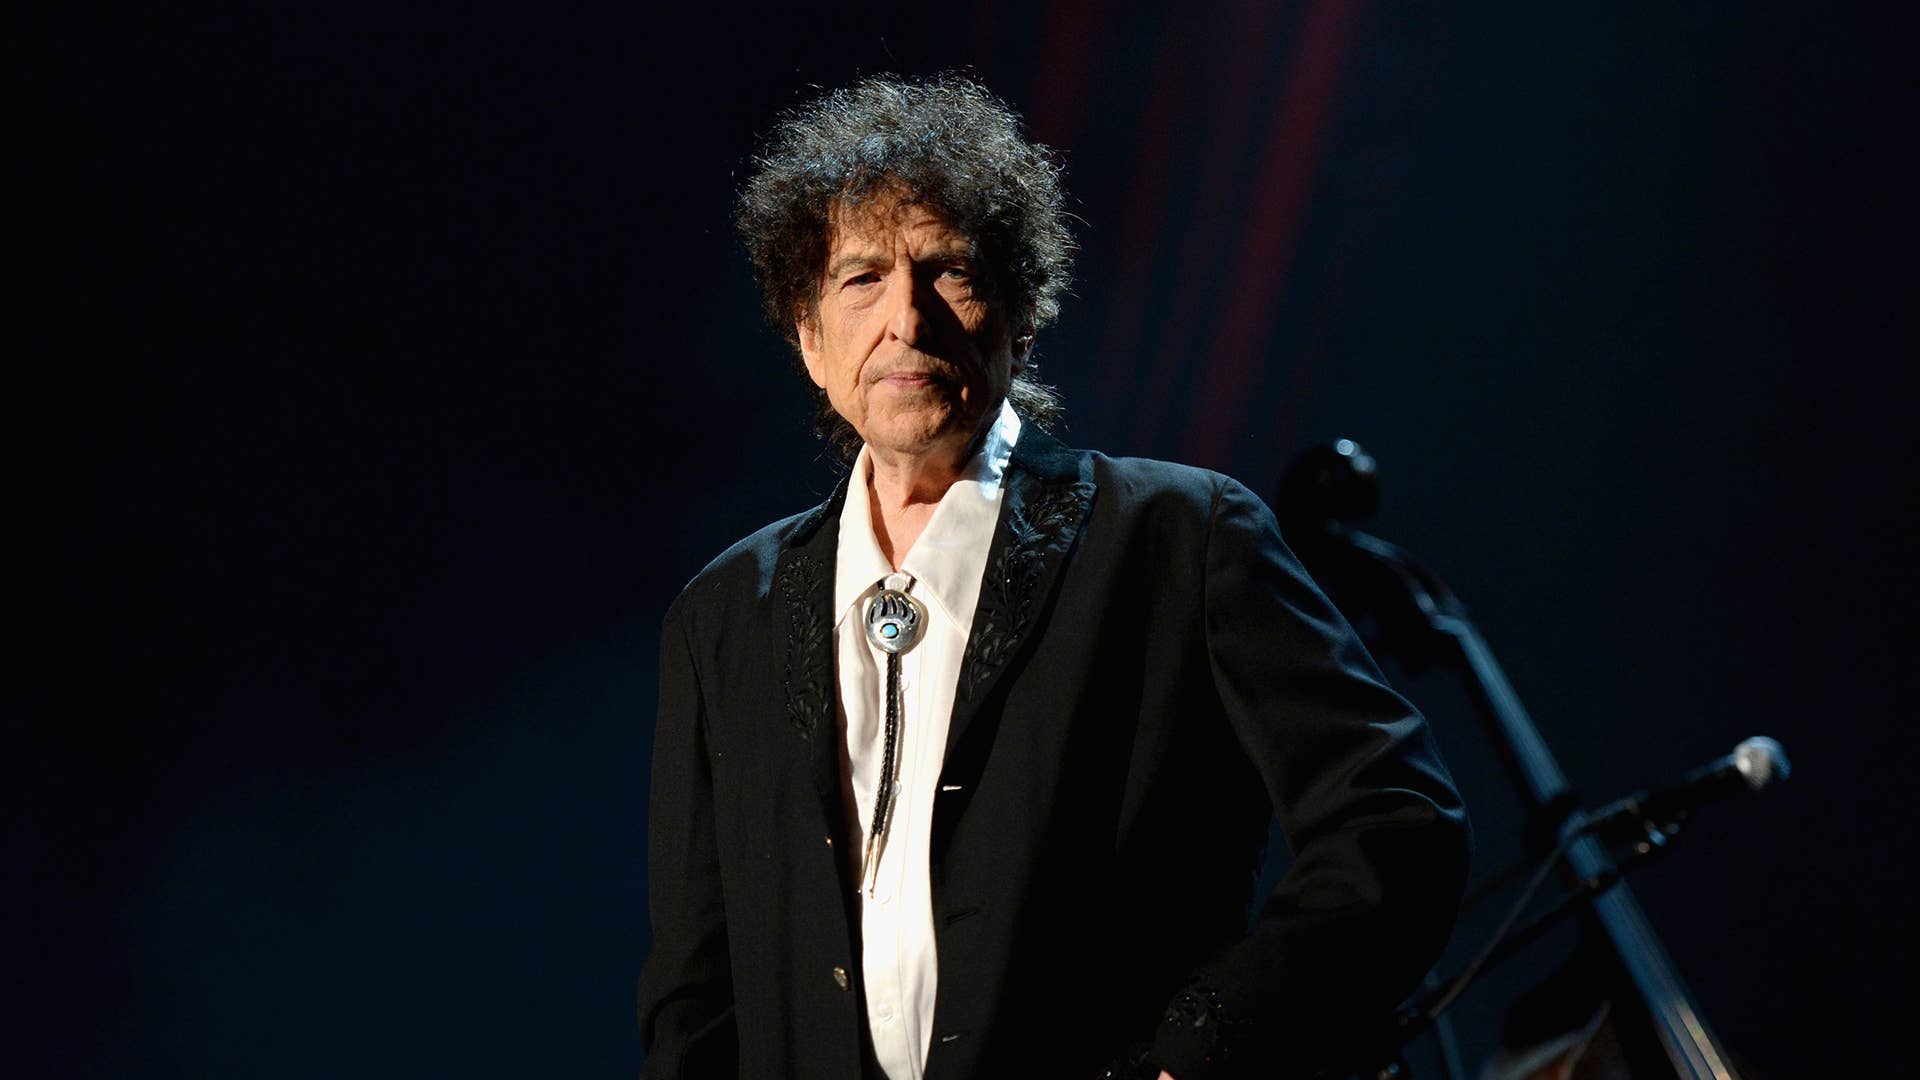 Honoree Bob Dylan speaks onstage at the 25th anniversary MusiCares Person of the Year Gala